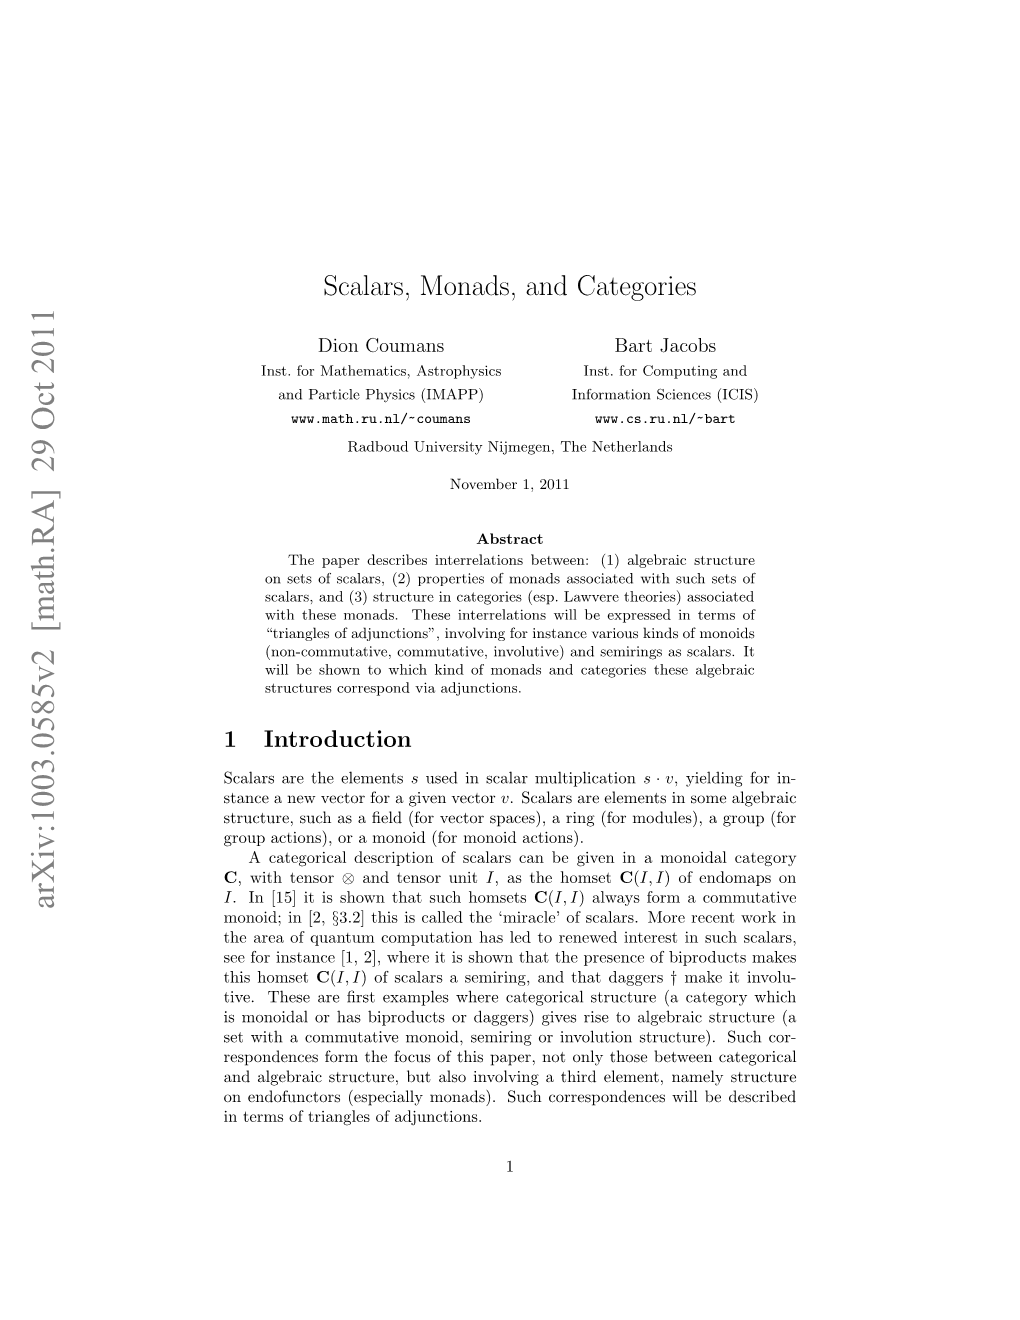 Scalars, Monads, and Categories